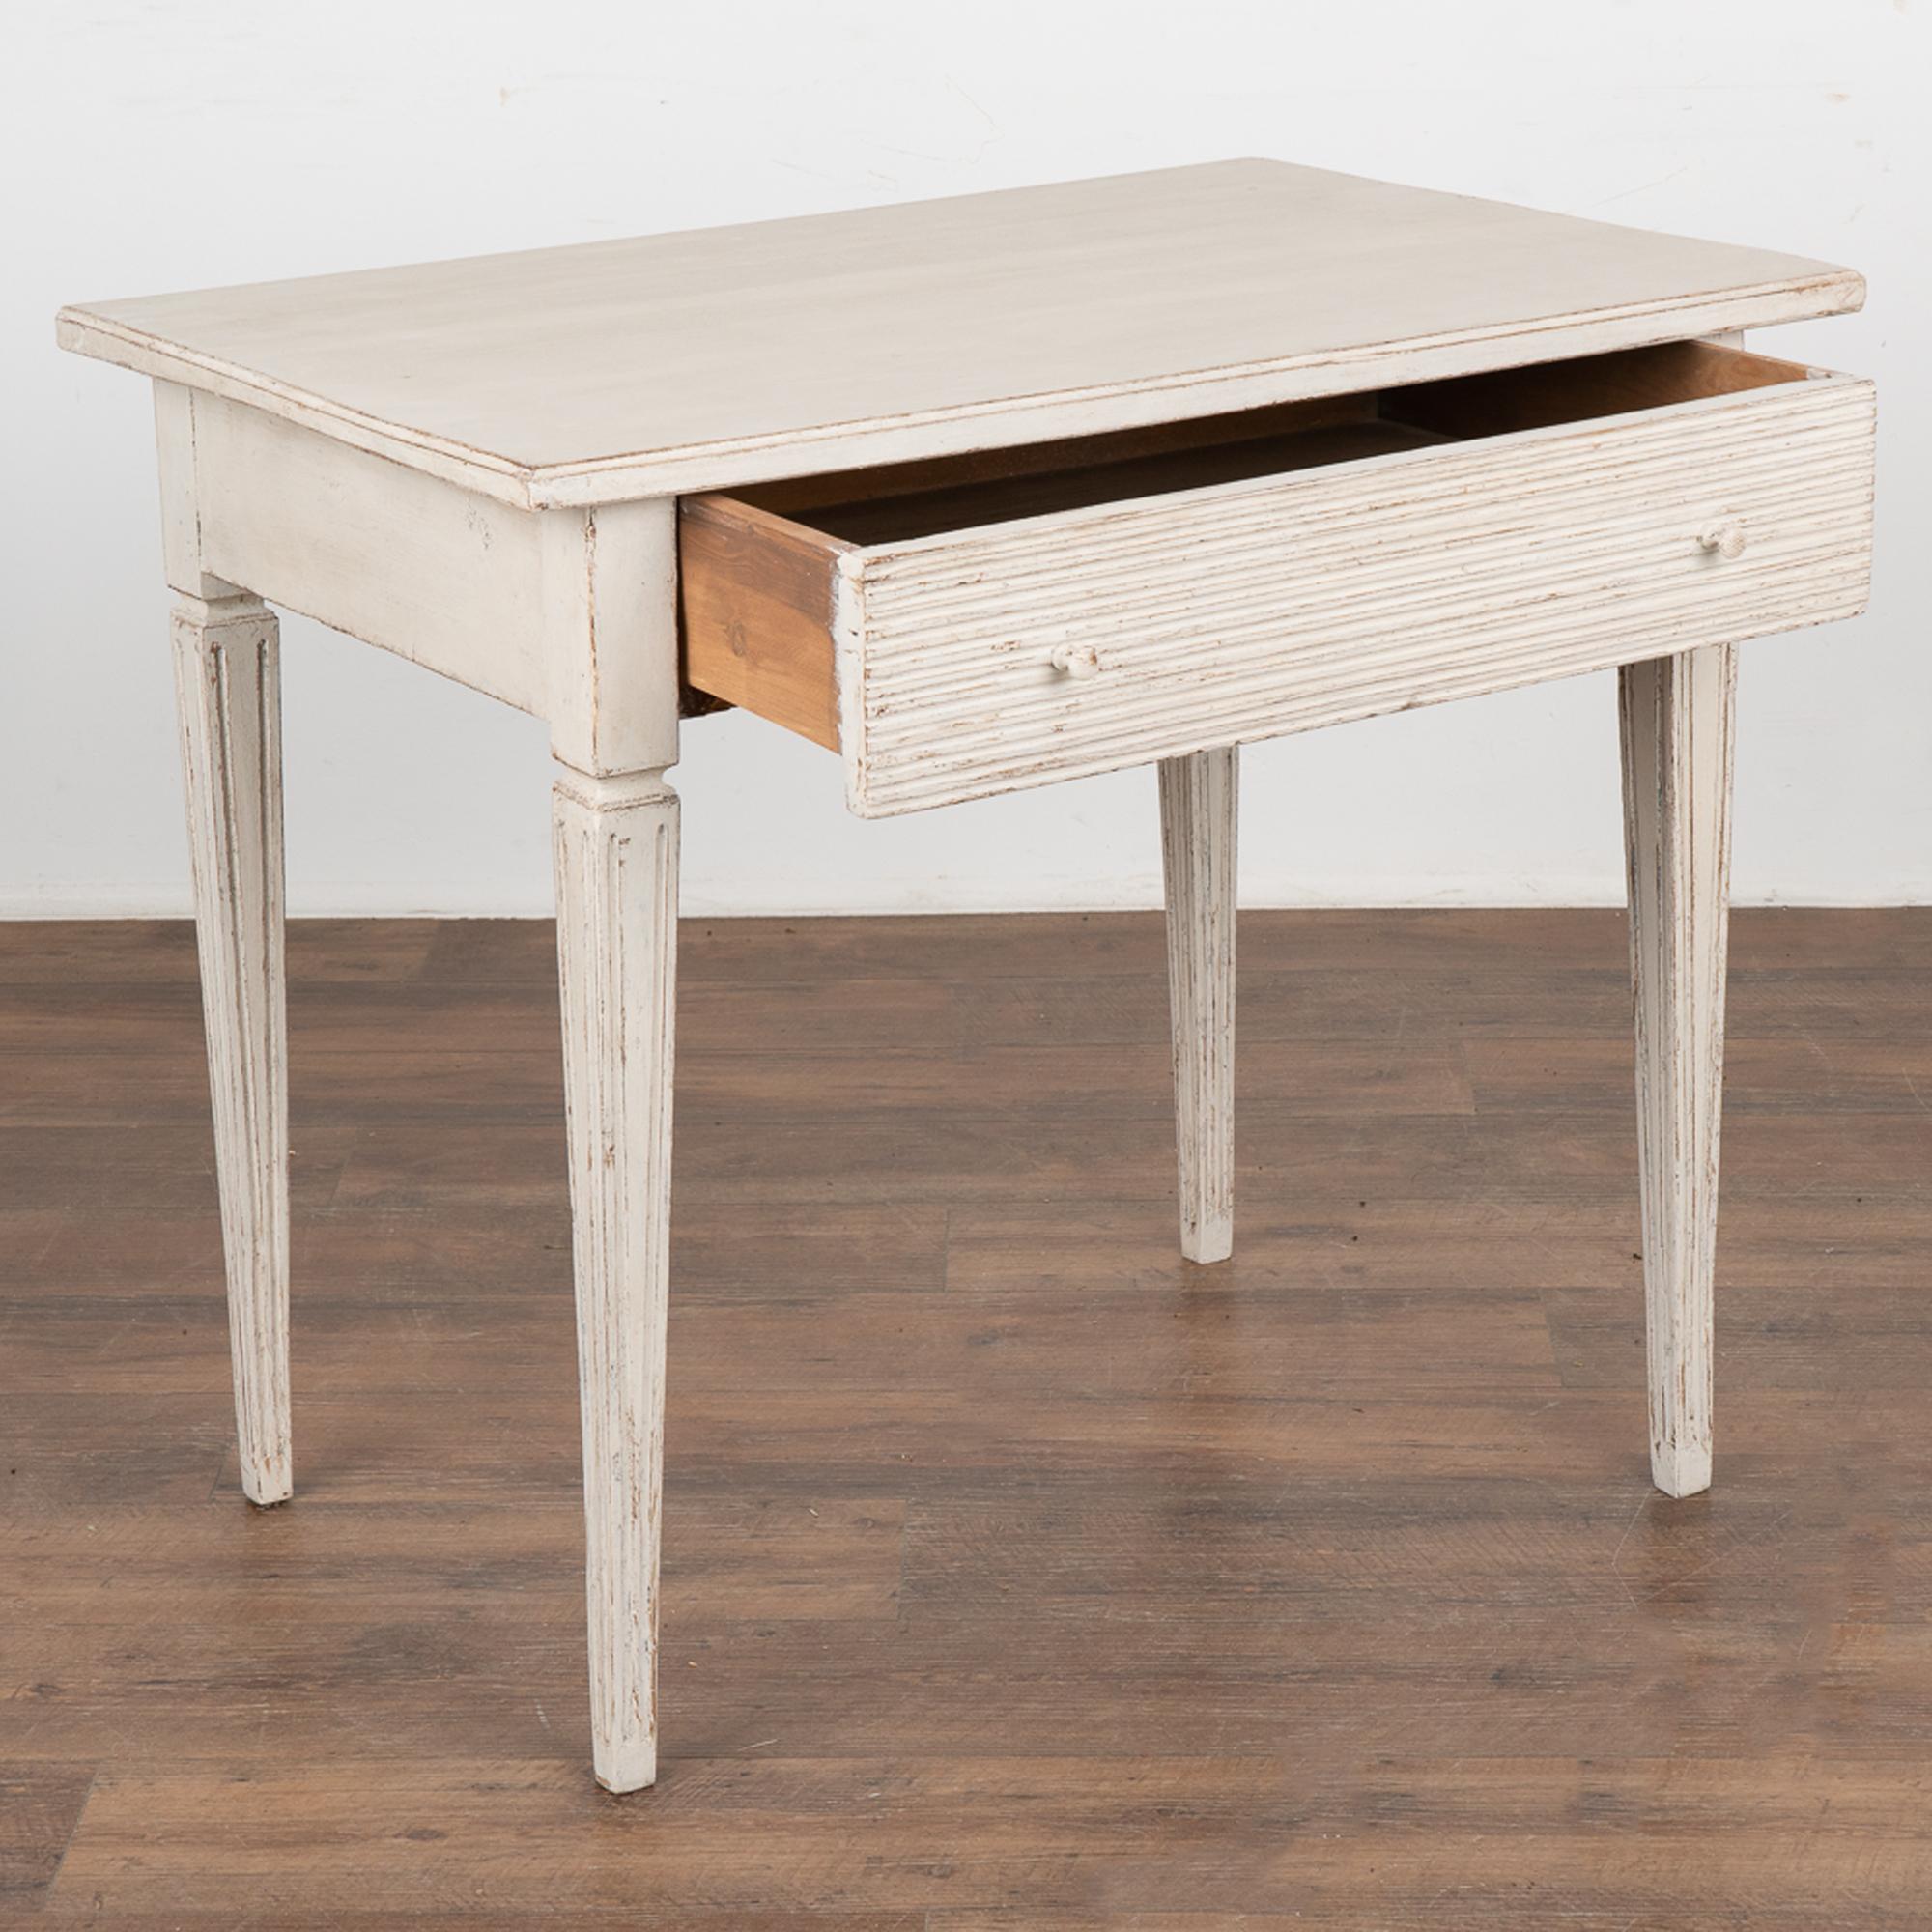 Swedish White Gustavian Side Table with Drawer, Sweden, circa 1820-40